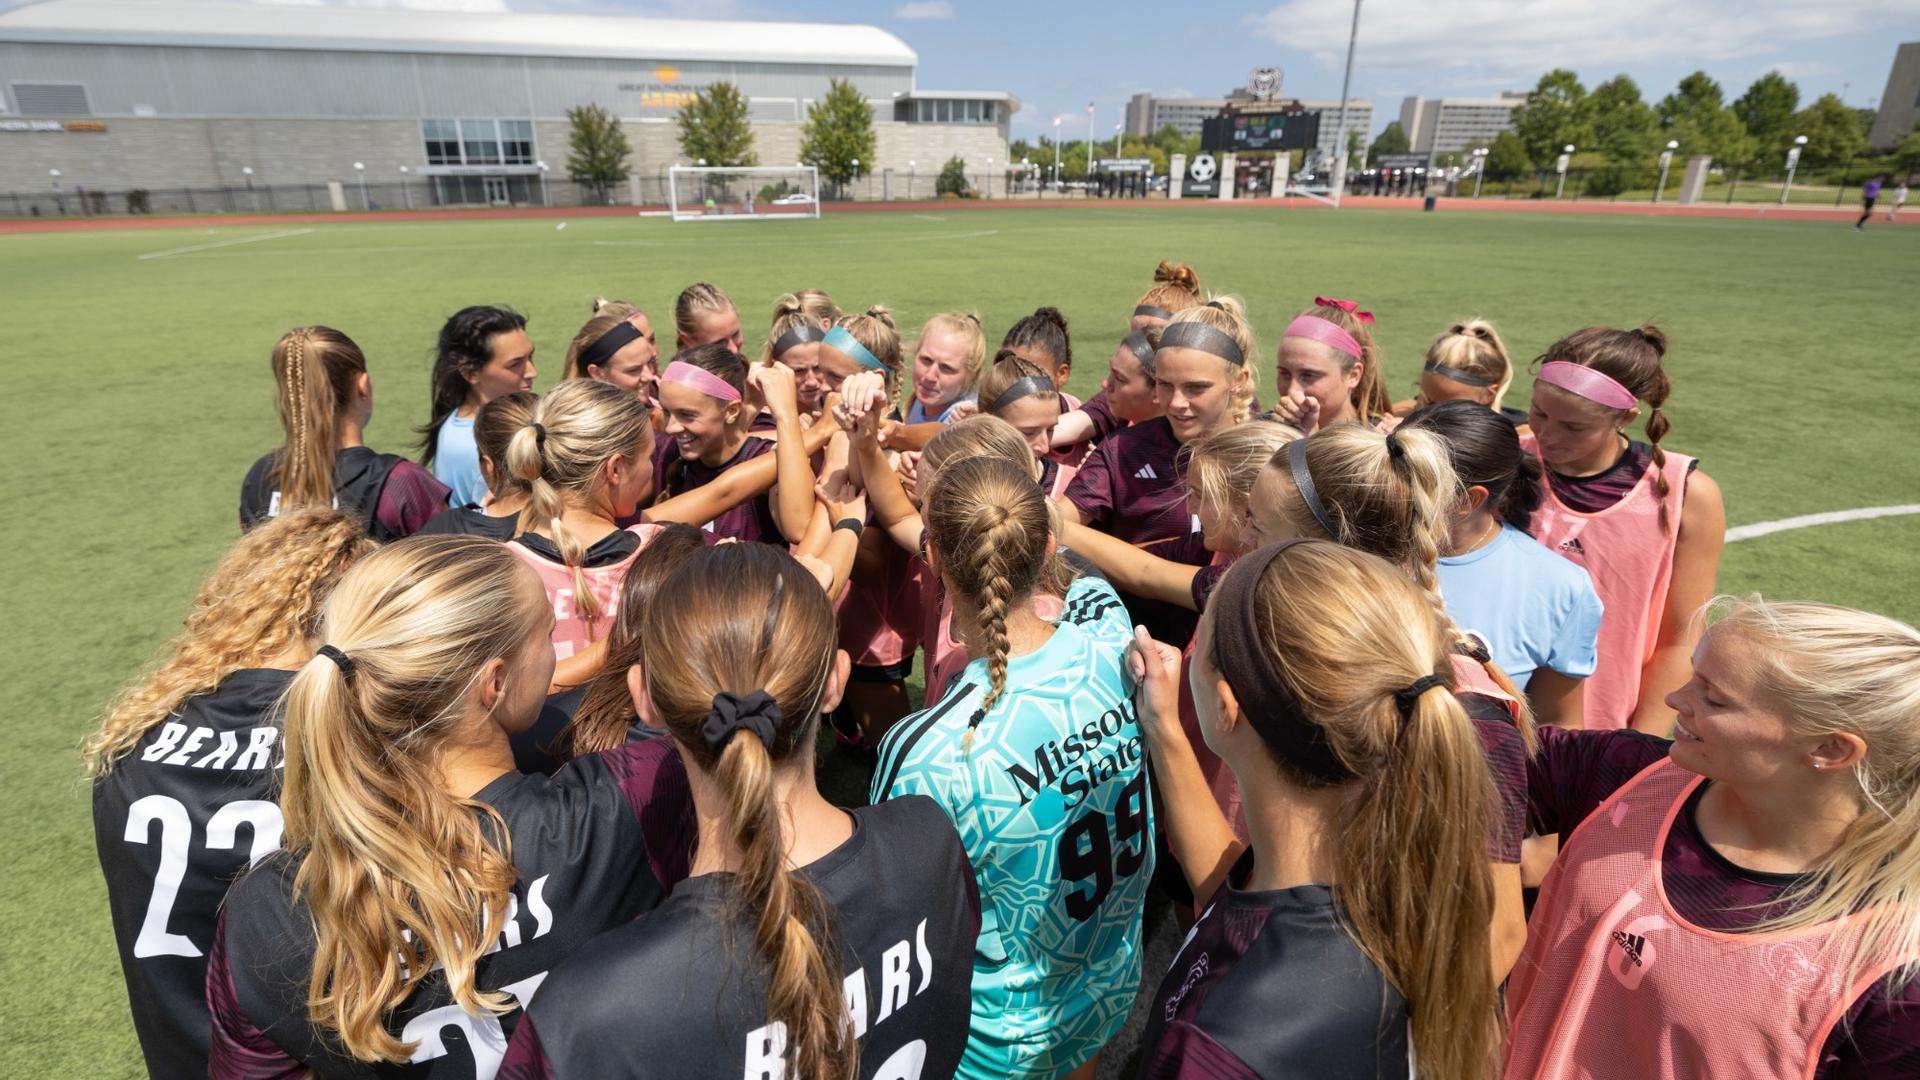 The Missouri State women's soccer team huddles up before a game